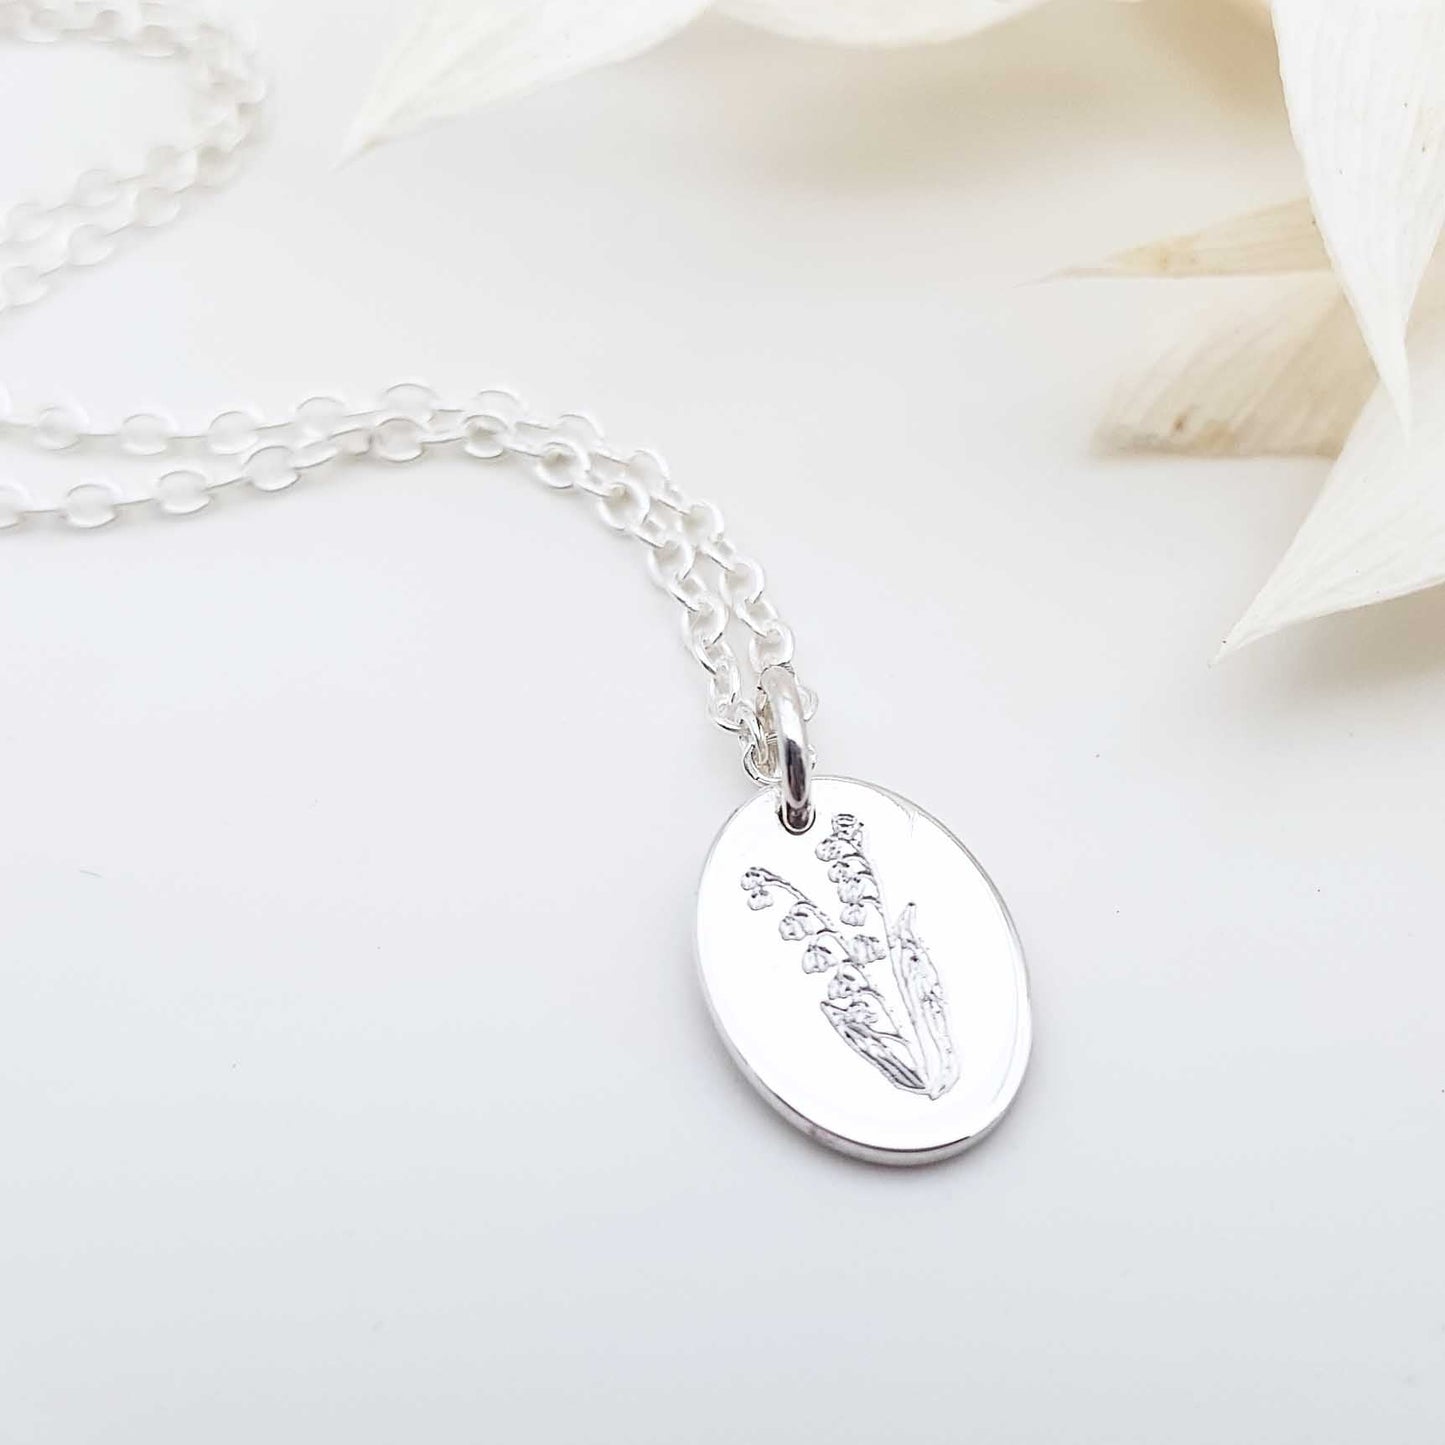 Becky Pearce Designs Birth Month Pendant Necklaces - Personalised